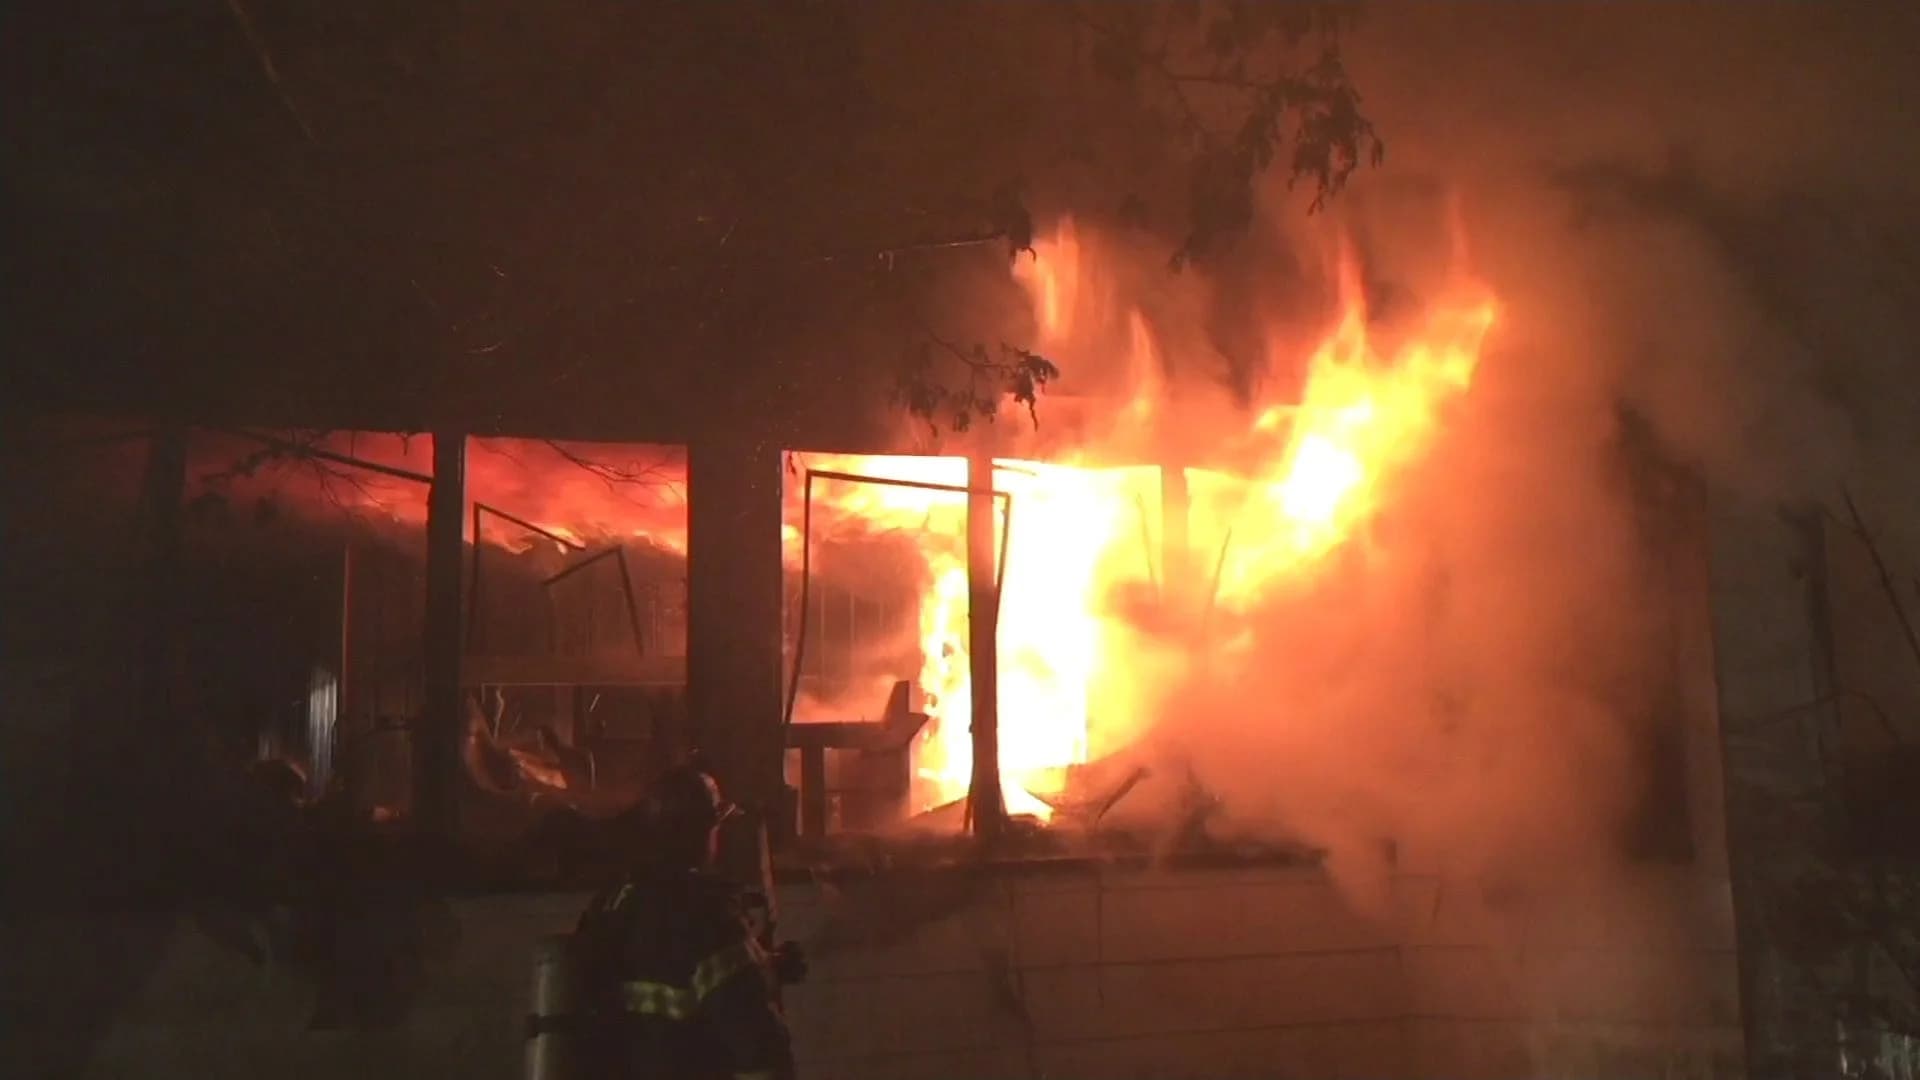 Firefighter injured while battling house fire in Lynbrook